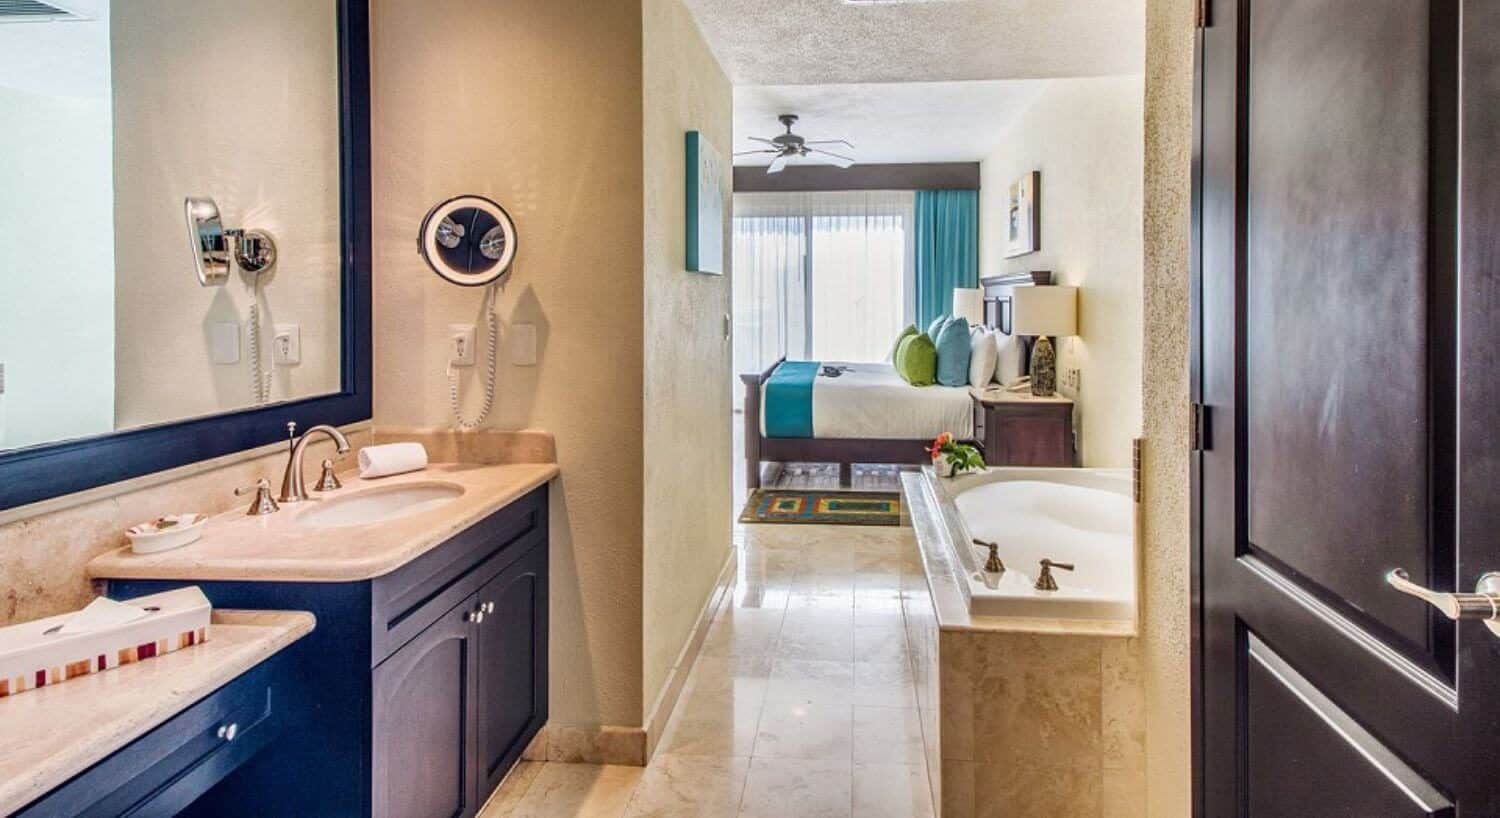 A bathroom with a sinks and vanity, dark brown cupboards, granite countertops, a deep soaking tub with bubbles; opening to a bedroom with a King bed, nightstand with lamp, and sliding doors with sheer curtains opening out to a private balcony.